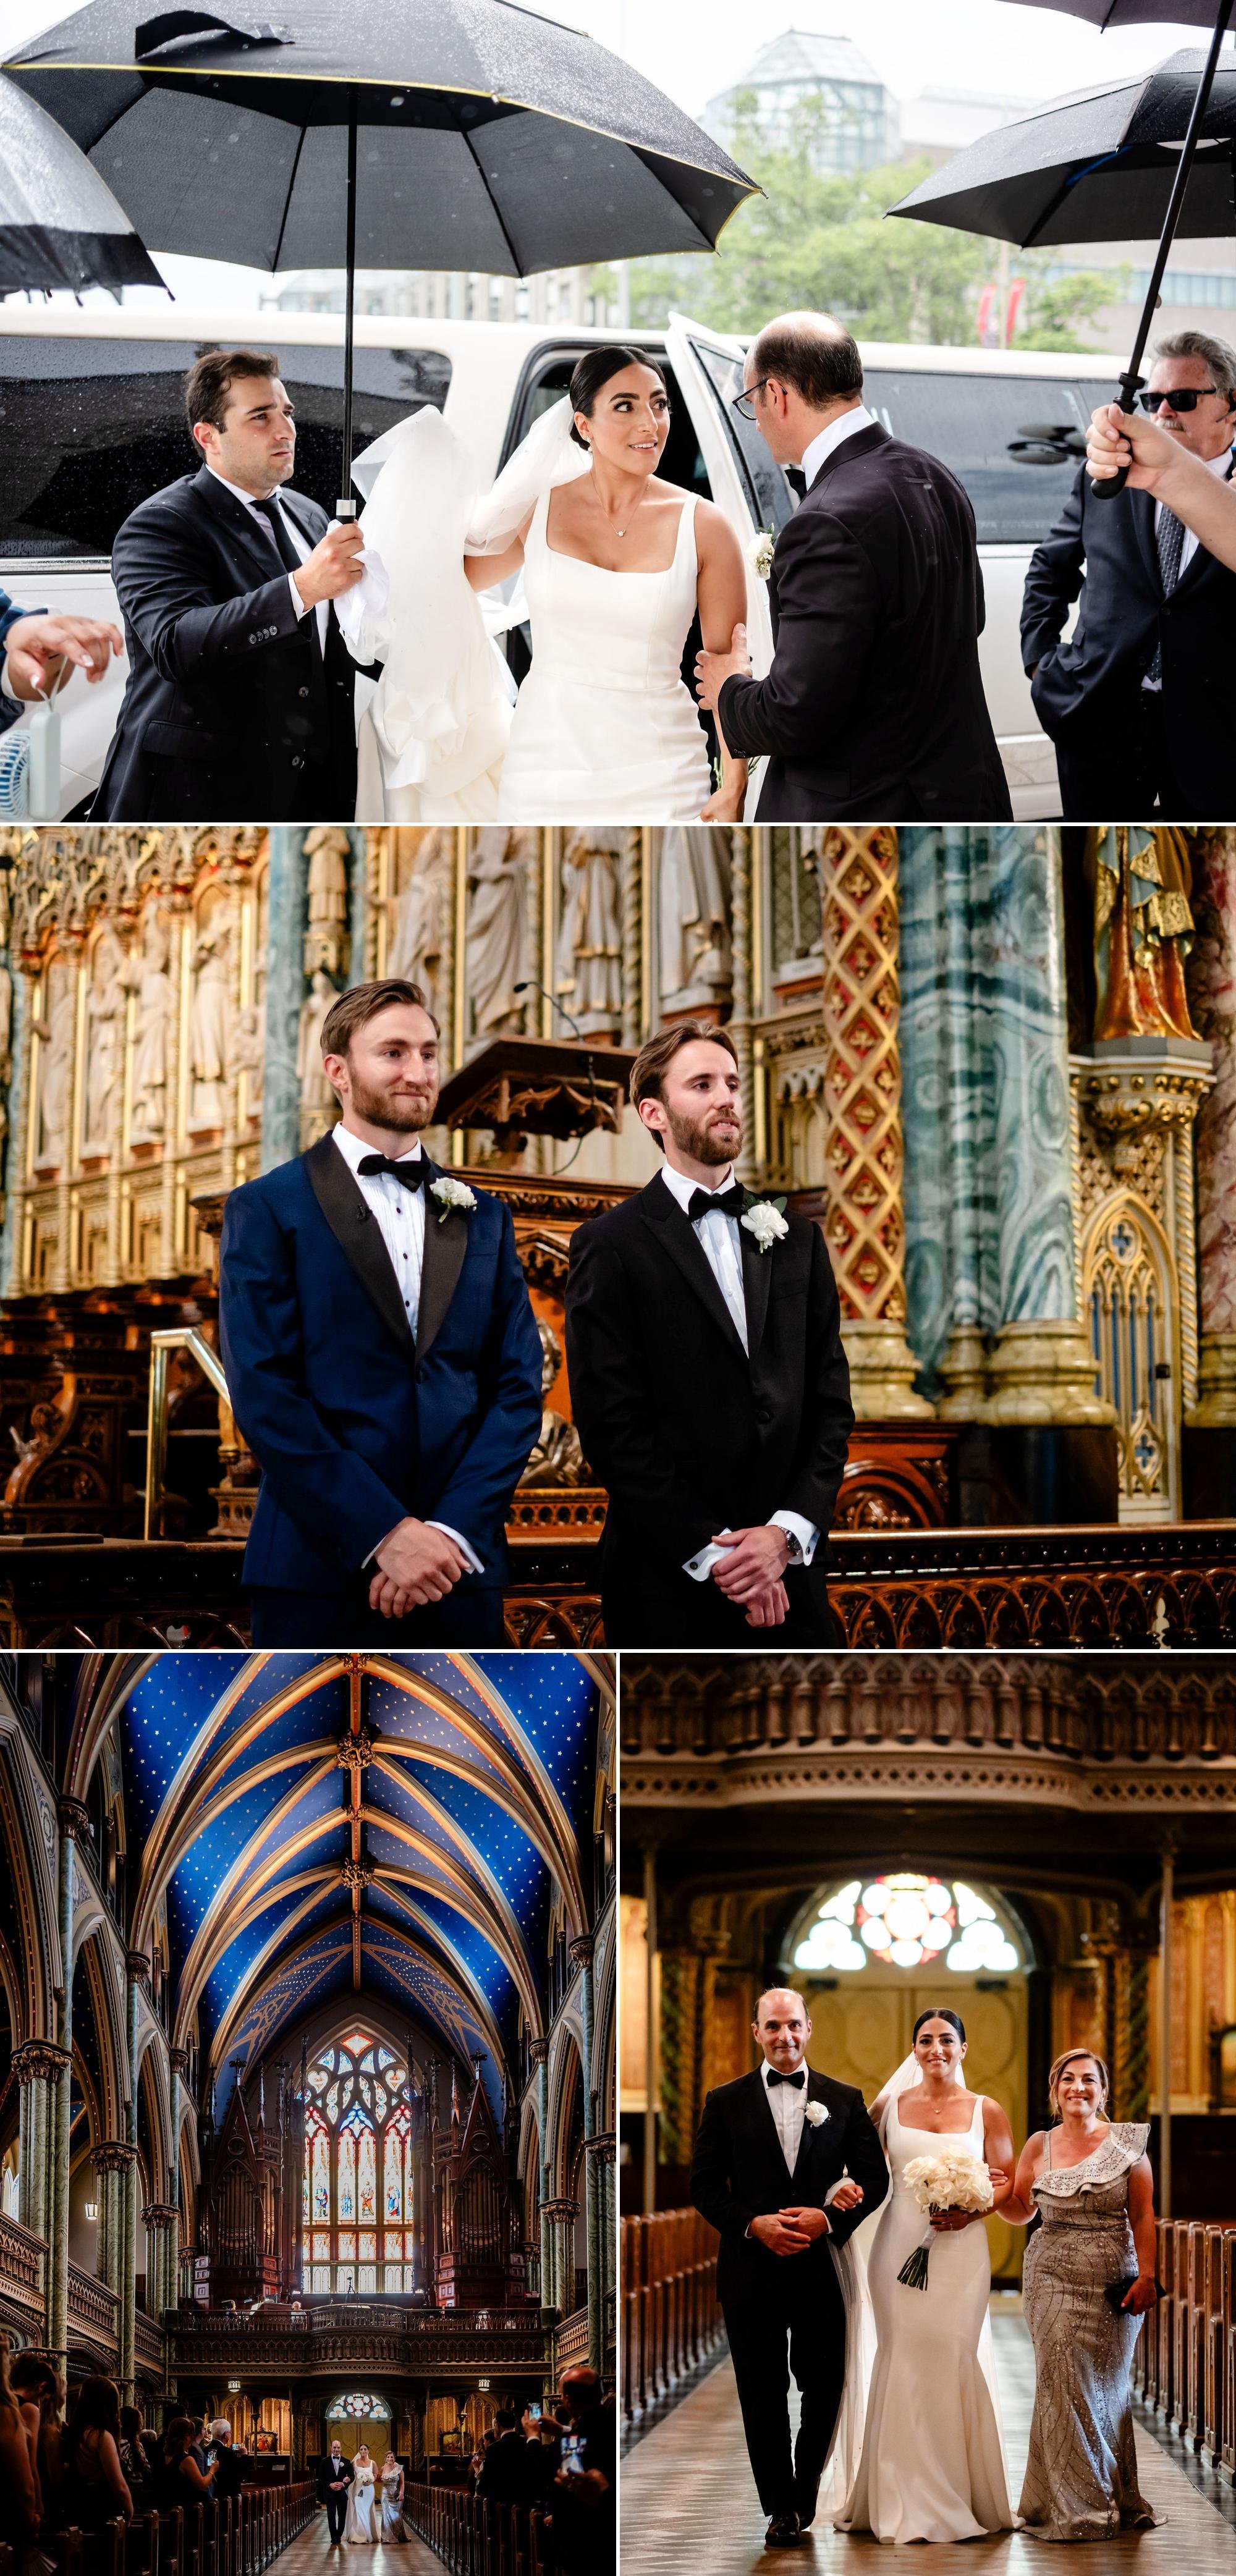 photographs from a wedding at Notre dame cathedral in ottawa